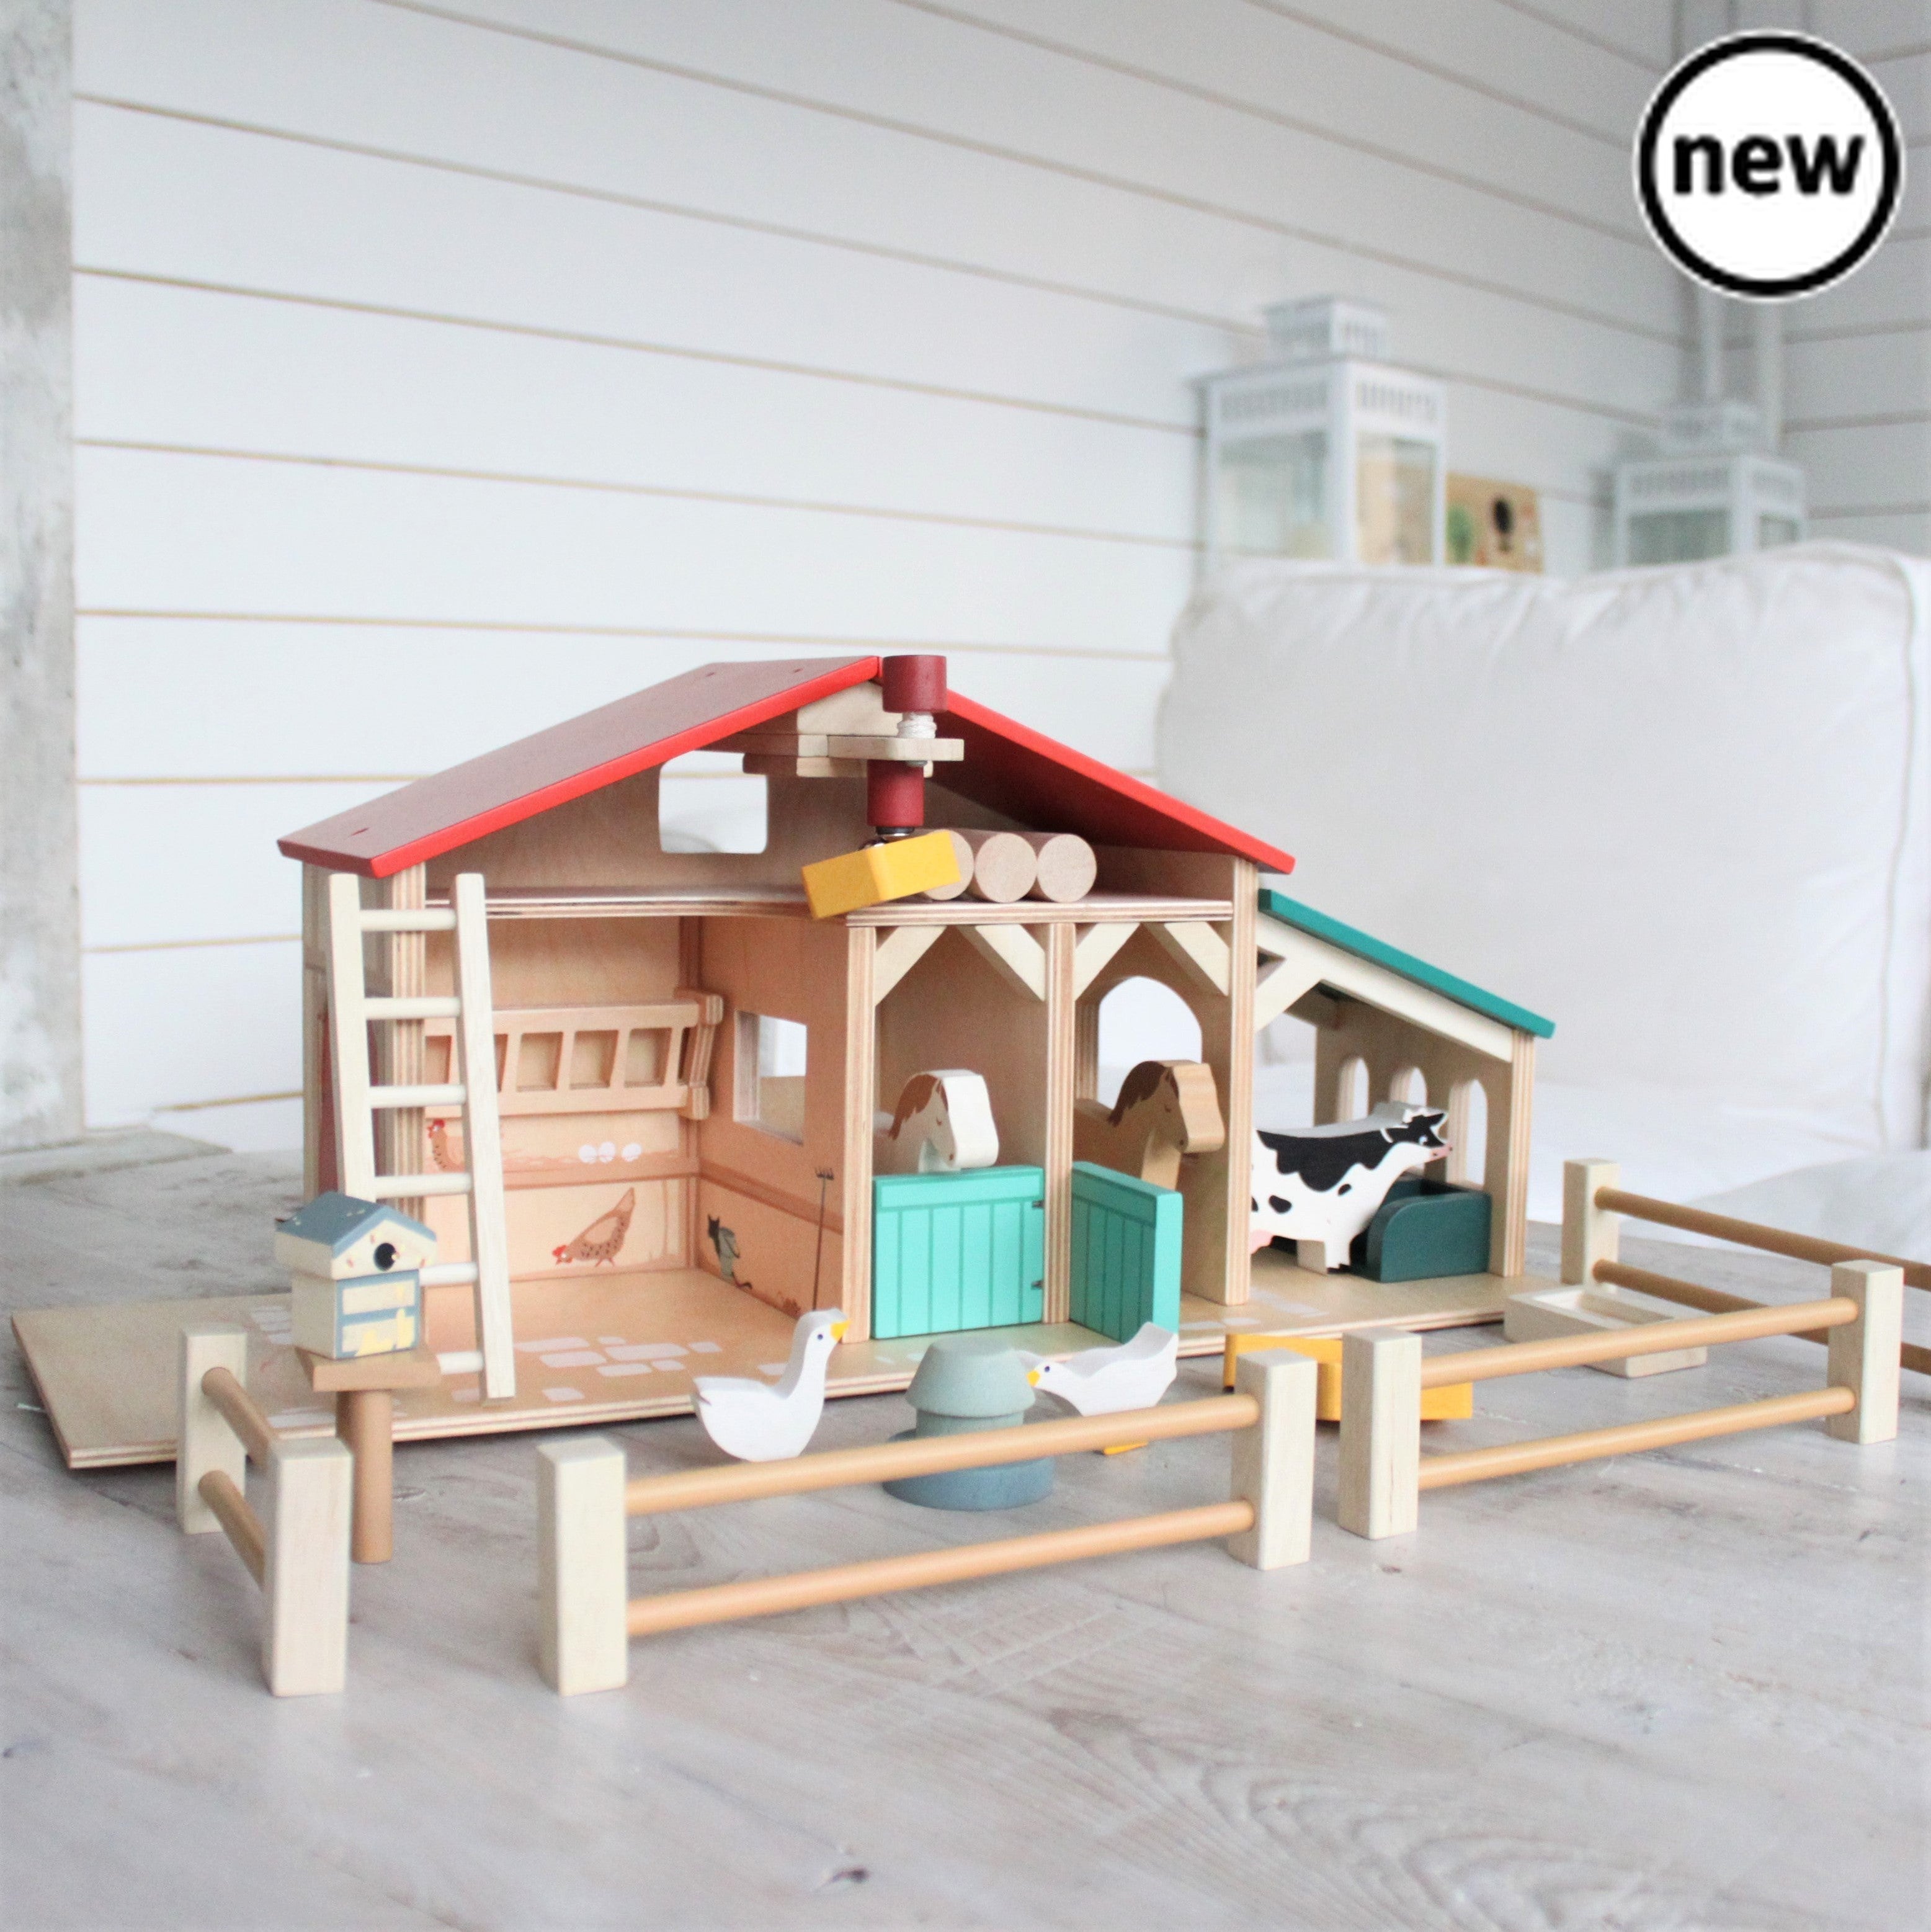 The Tenderleaf Farm, Designed and made by Tender Leaf ToysWelcome to the farm! Made throughout from top quality wood, this farm has been designed to be open and accessible for little hands. Product features: a barn with barn doors and a feeding trough, two stables with opening doors, a ladder leading to hay loft, a pulley system with a magnetic end to lift the hay bales, a cowshed with feeding compartments, four fences, a stile, three hay bales, two geese, two horses, a grain trough, an animal feeding troug